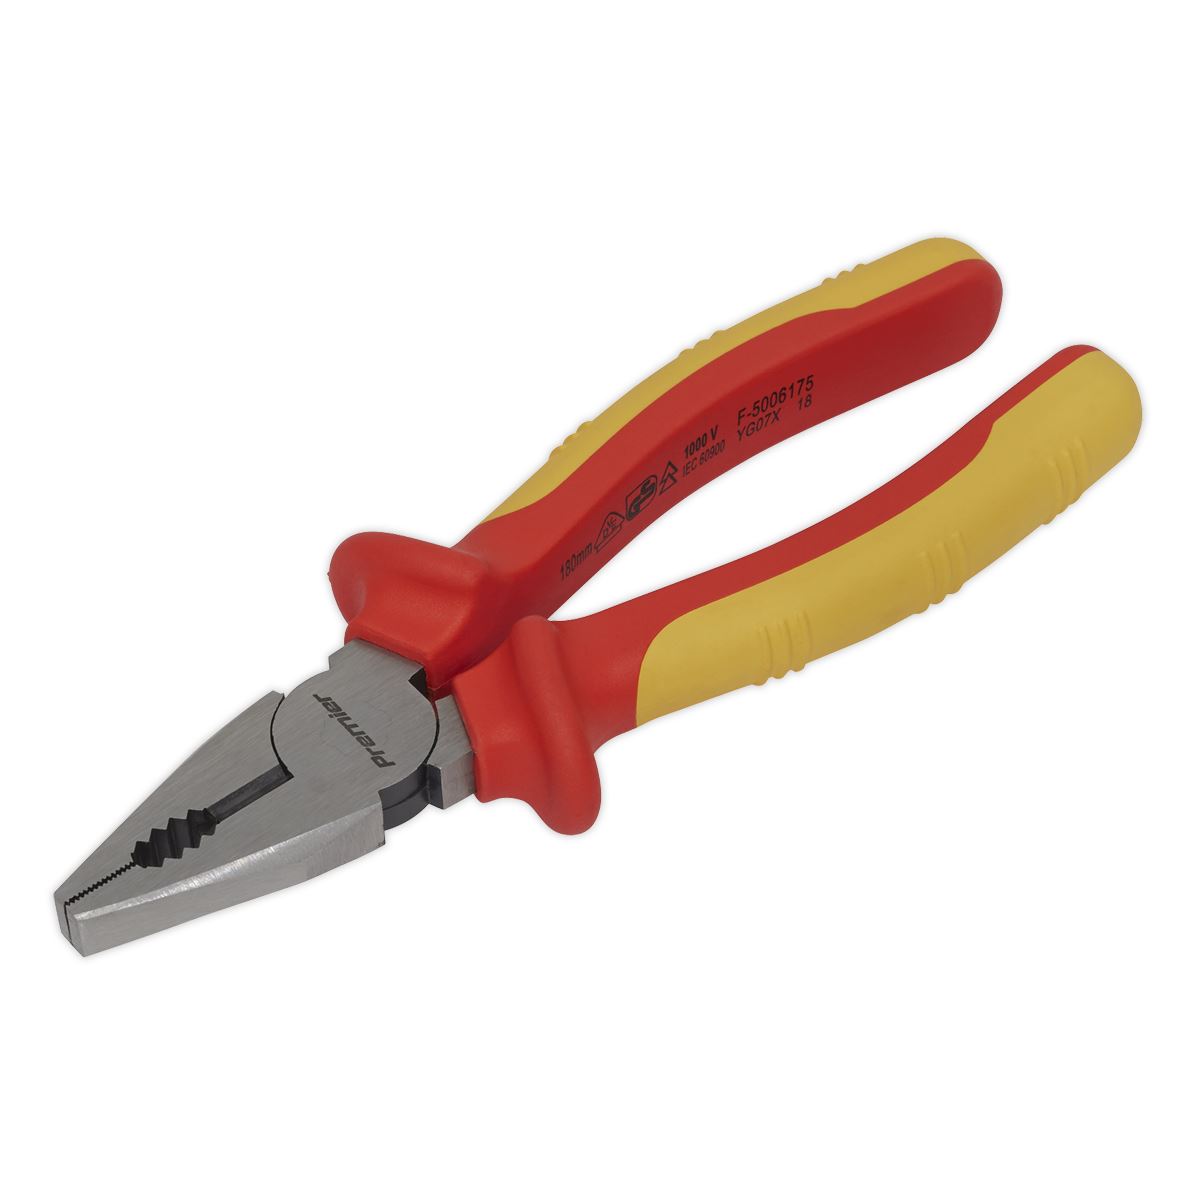 Sealey Premier Combination Pliers 175mm VDE Approved